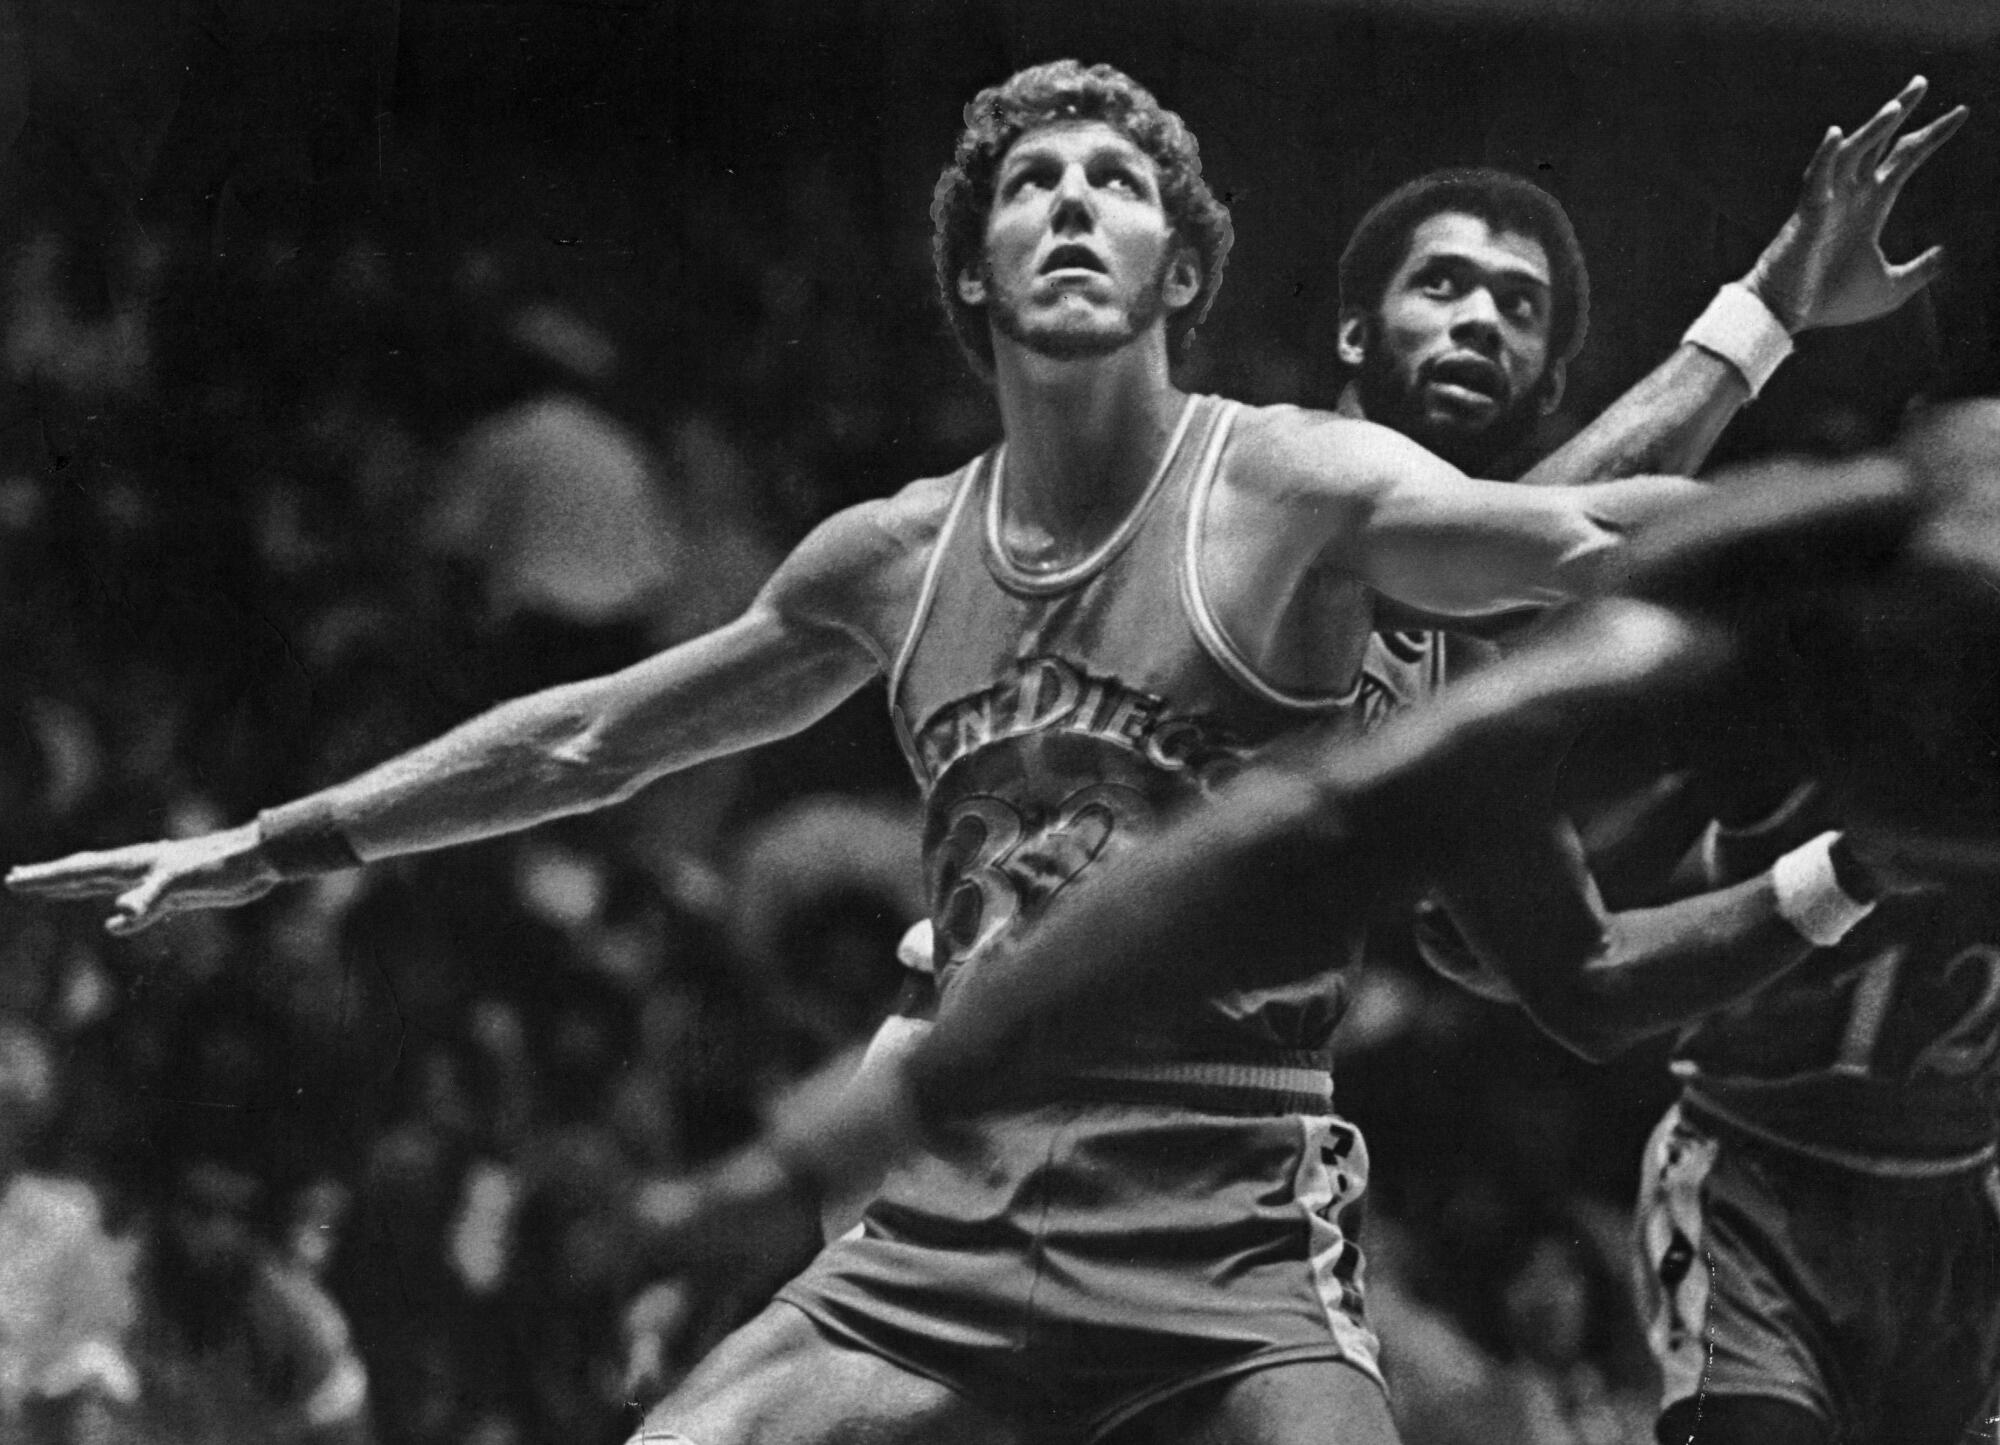 San Diego Clippers center Bill Walton defends in front of Lakers center Kareem Abdul-Jabbar.